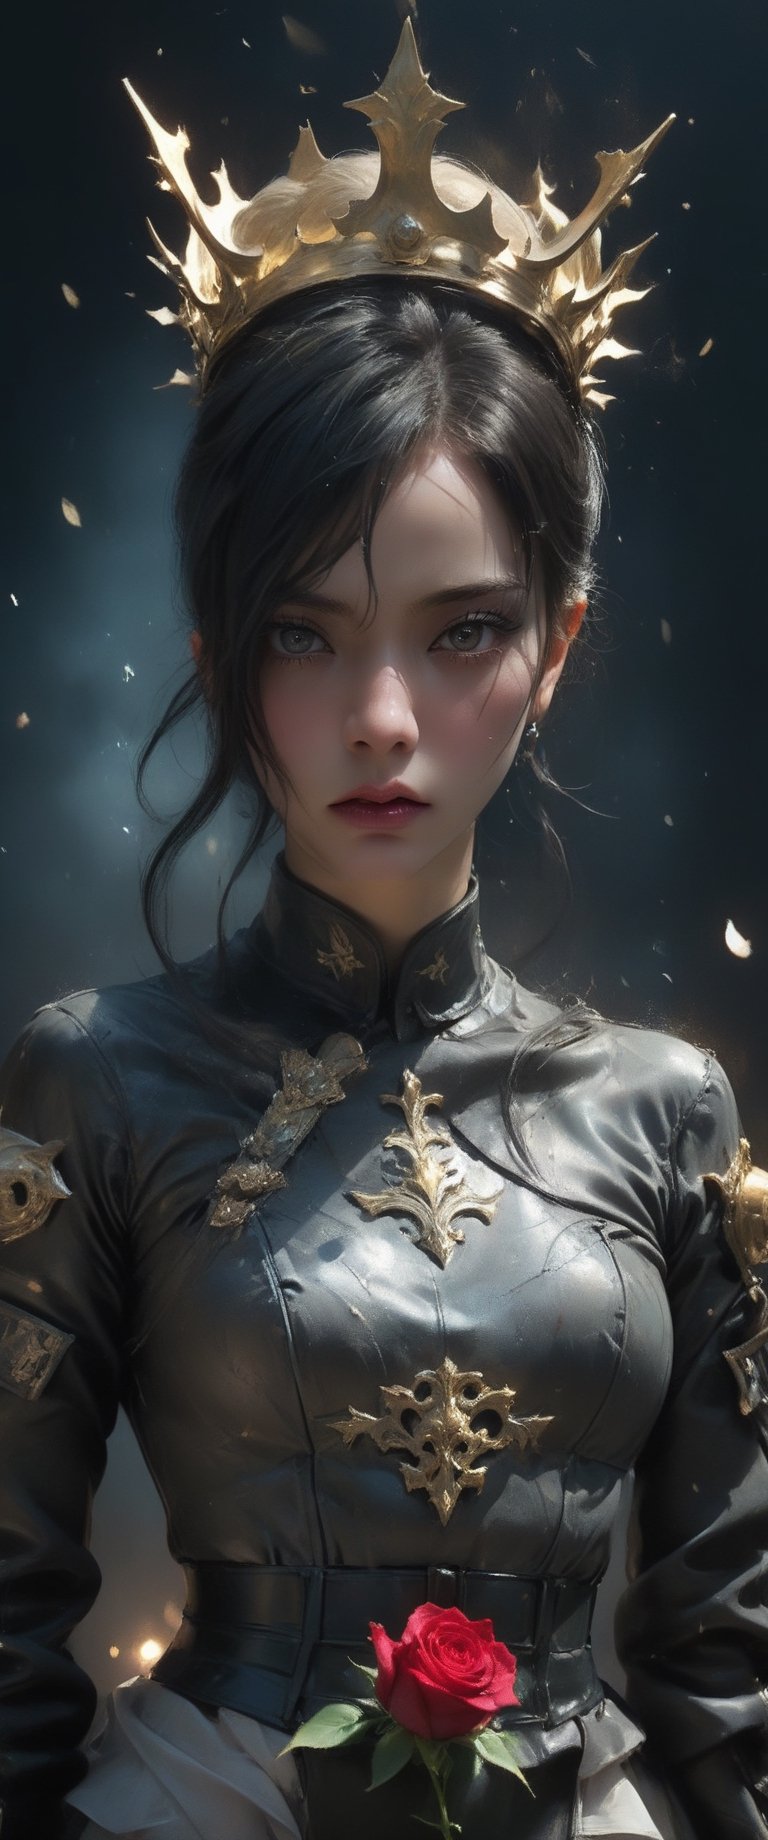  breathtaking ethereal RAW photo of female ((poster of a sexy [princess, suffering, burdened by the weight of a crown, ] in a [ ], pissed_off,angry, latex uniform, eye angle view, ,dark anim,minsi,goeun, , , 
)), dark and moody style, perfect face, outstretched perfect hands . masterpiece, professional, award-winning, intricate details, ultra high detailed, 64k, dramatic light, volumetric light, dynamic lighting, Epic, splash art

.. ), by james jean $, roby dwi antono $, ross tran $. francis bacon $, michal mraz $, adrian ghenie $, petra cortright $, gerhard richter $, takato yamamoto $, ashley wood, tense atmospheric, , , , sooyaaa,IMGFIX,Comic Book-Style,Movie Aesthetic,action shot,photo r3al,bad quality image,oil painting, cinematic moviemaker style,Japan Vibes,H effect,koh_yunjung
,koh_yunjung,kwon-nara,sooyaaa,colorful,roses_are_rosie,armor,han-hyoju-xl